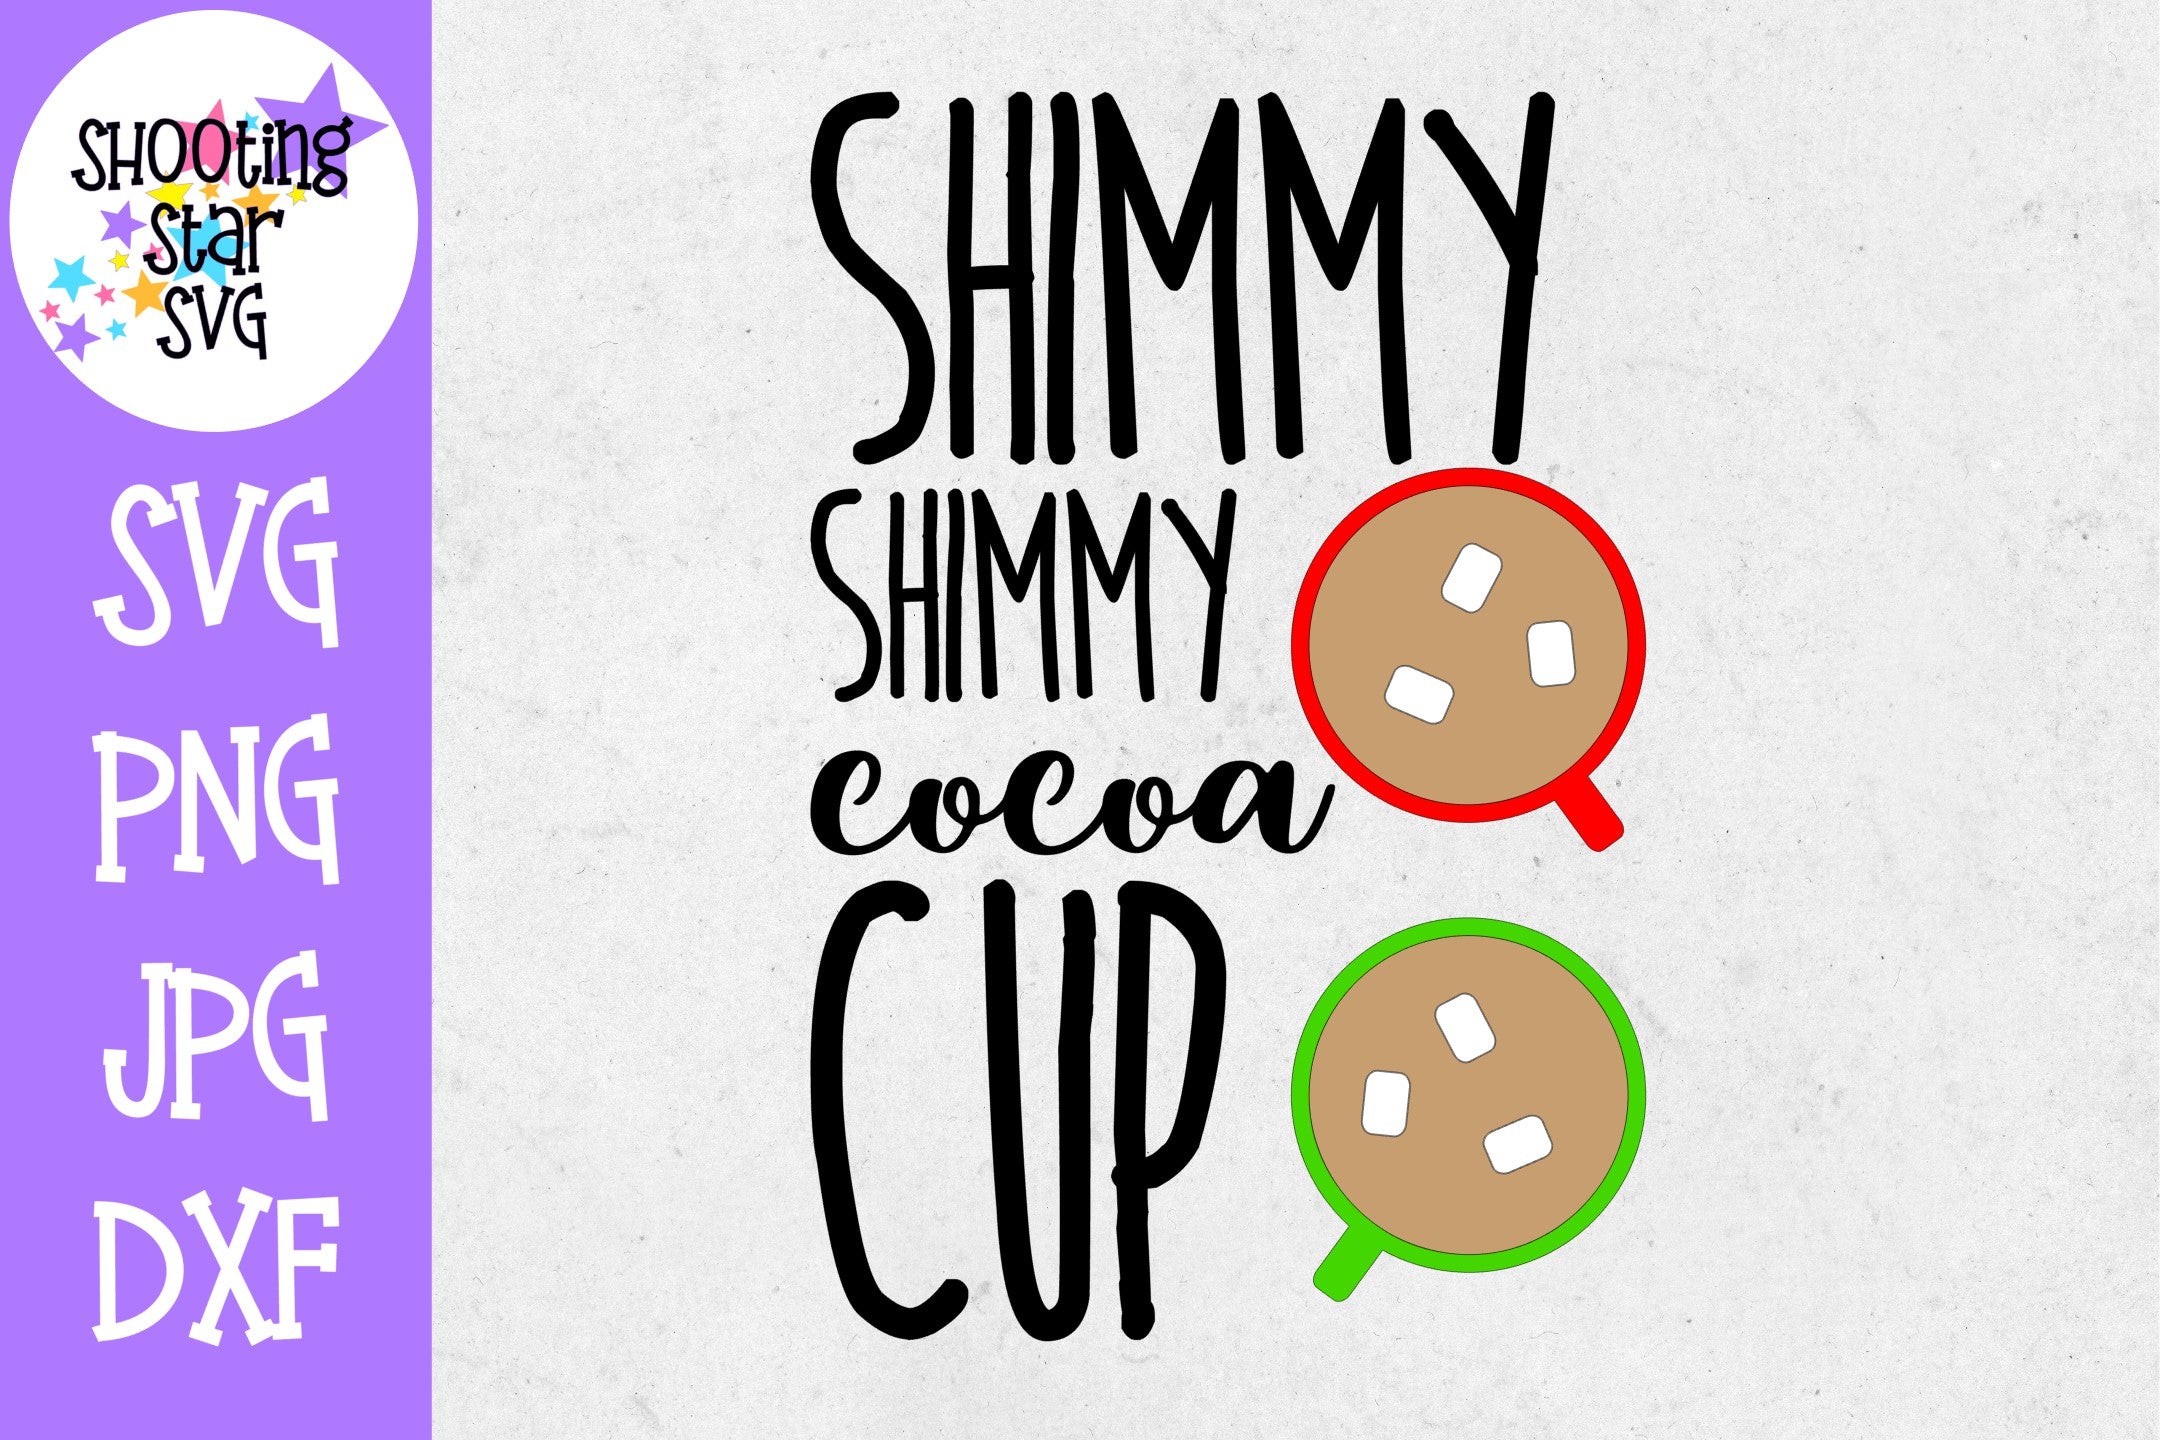 Shimmy Shimmy Cocoa Cup - Christmas SVG